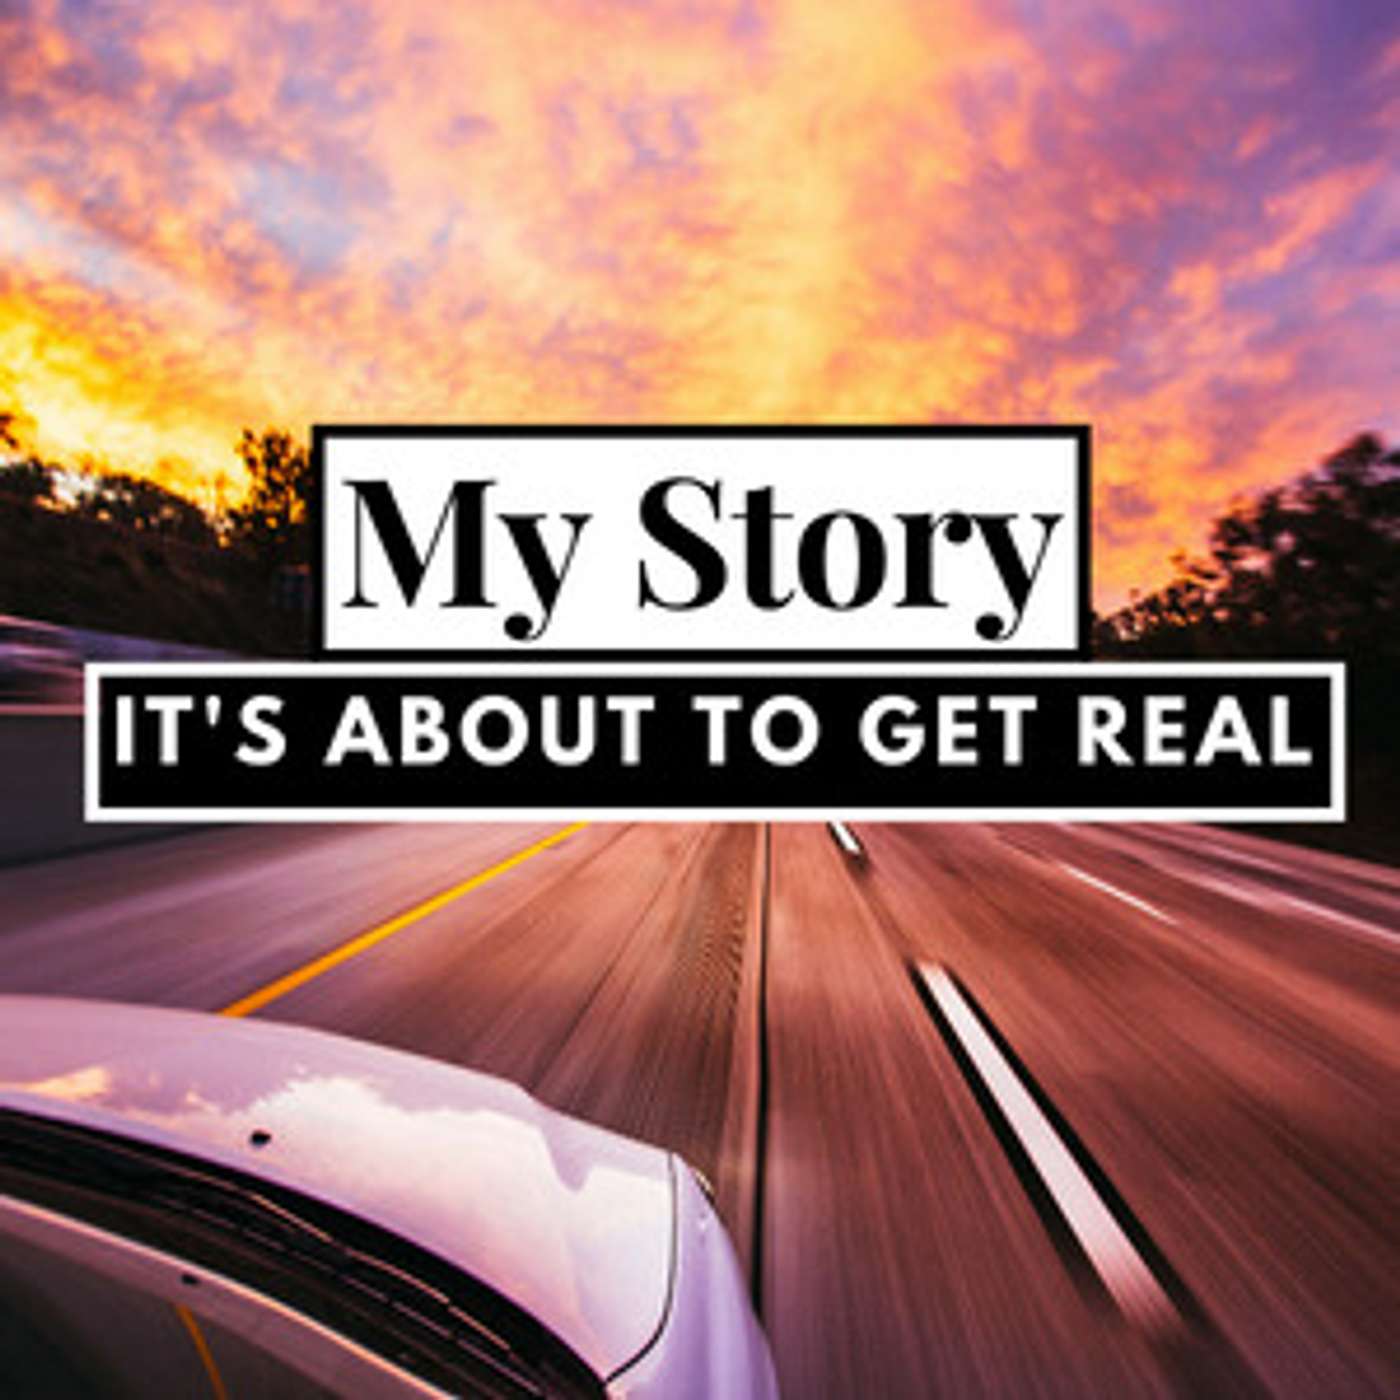 My Story - It's About to Get Real and It's Time to Share